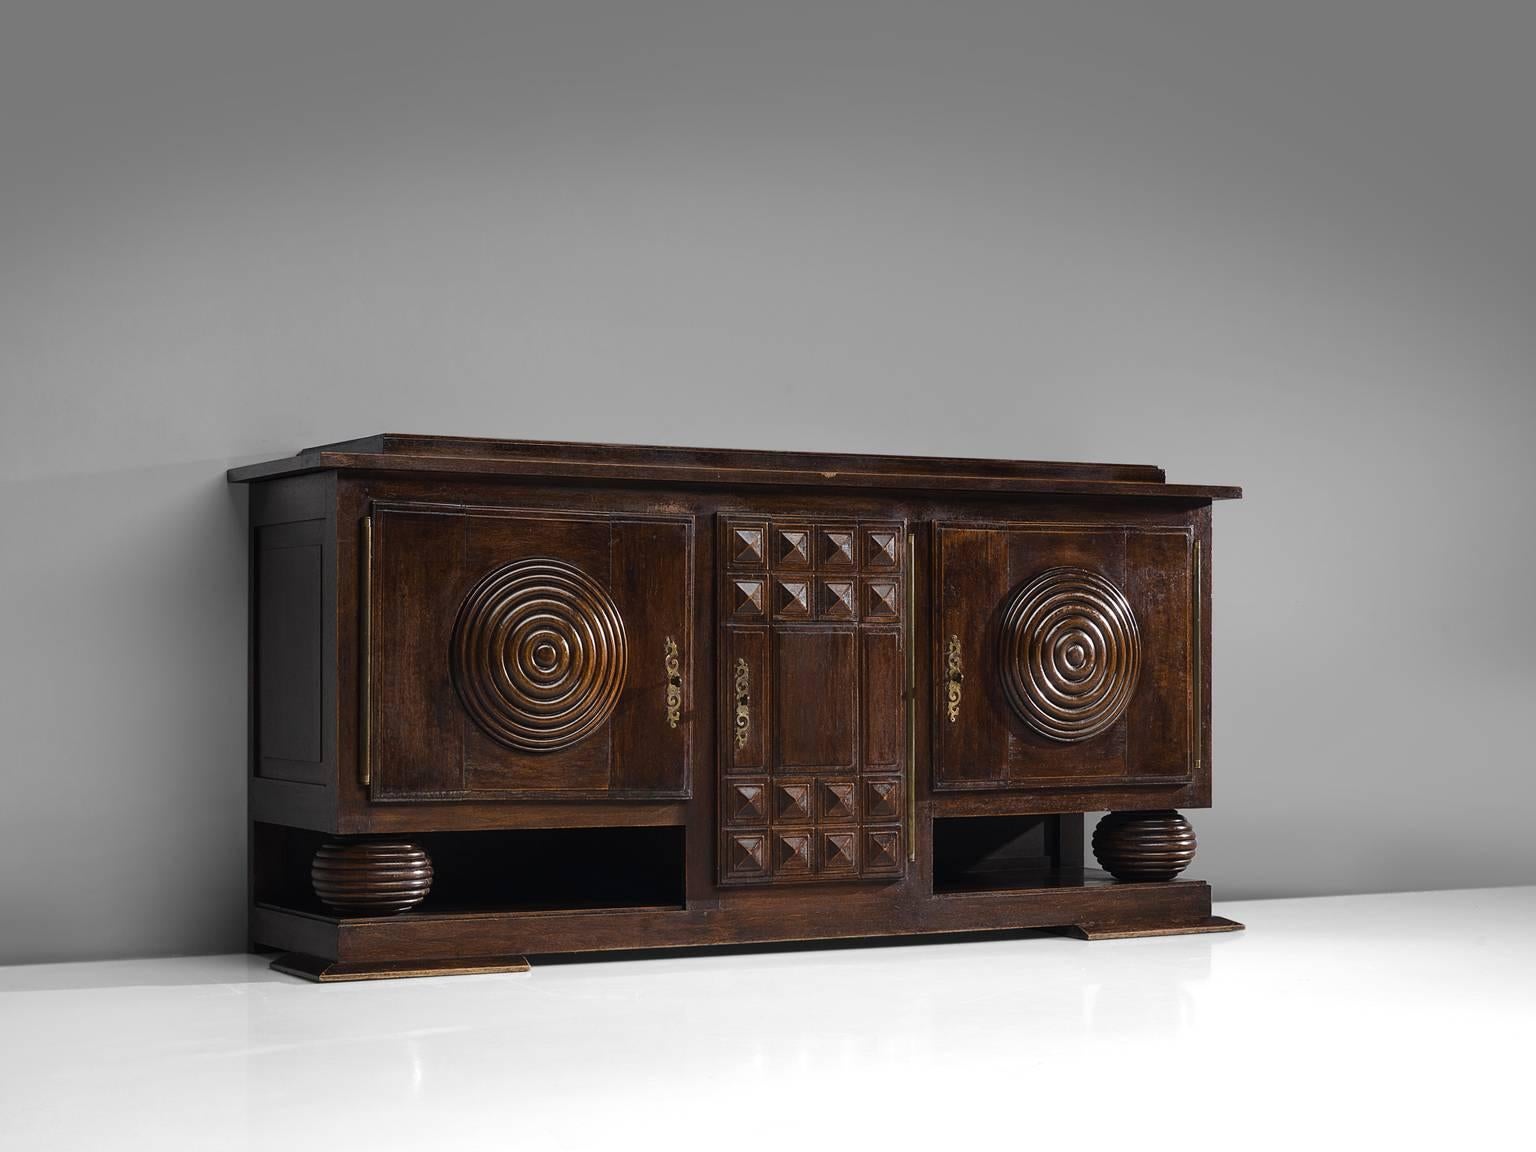 Charles Dudouyt, credenza, wood, circa 1925.

This sturdy credenza in oak with cilinder wood work is a truly sculptural piece. This two-door sideboard is equipped with several shelves and drawers which provide plenty of storage space. The detailing